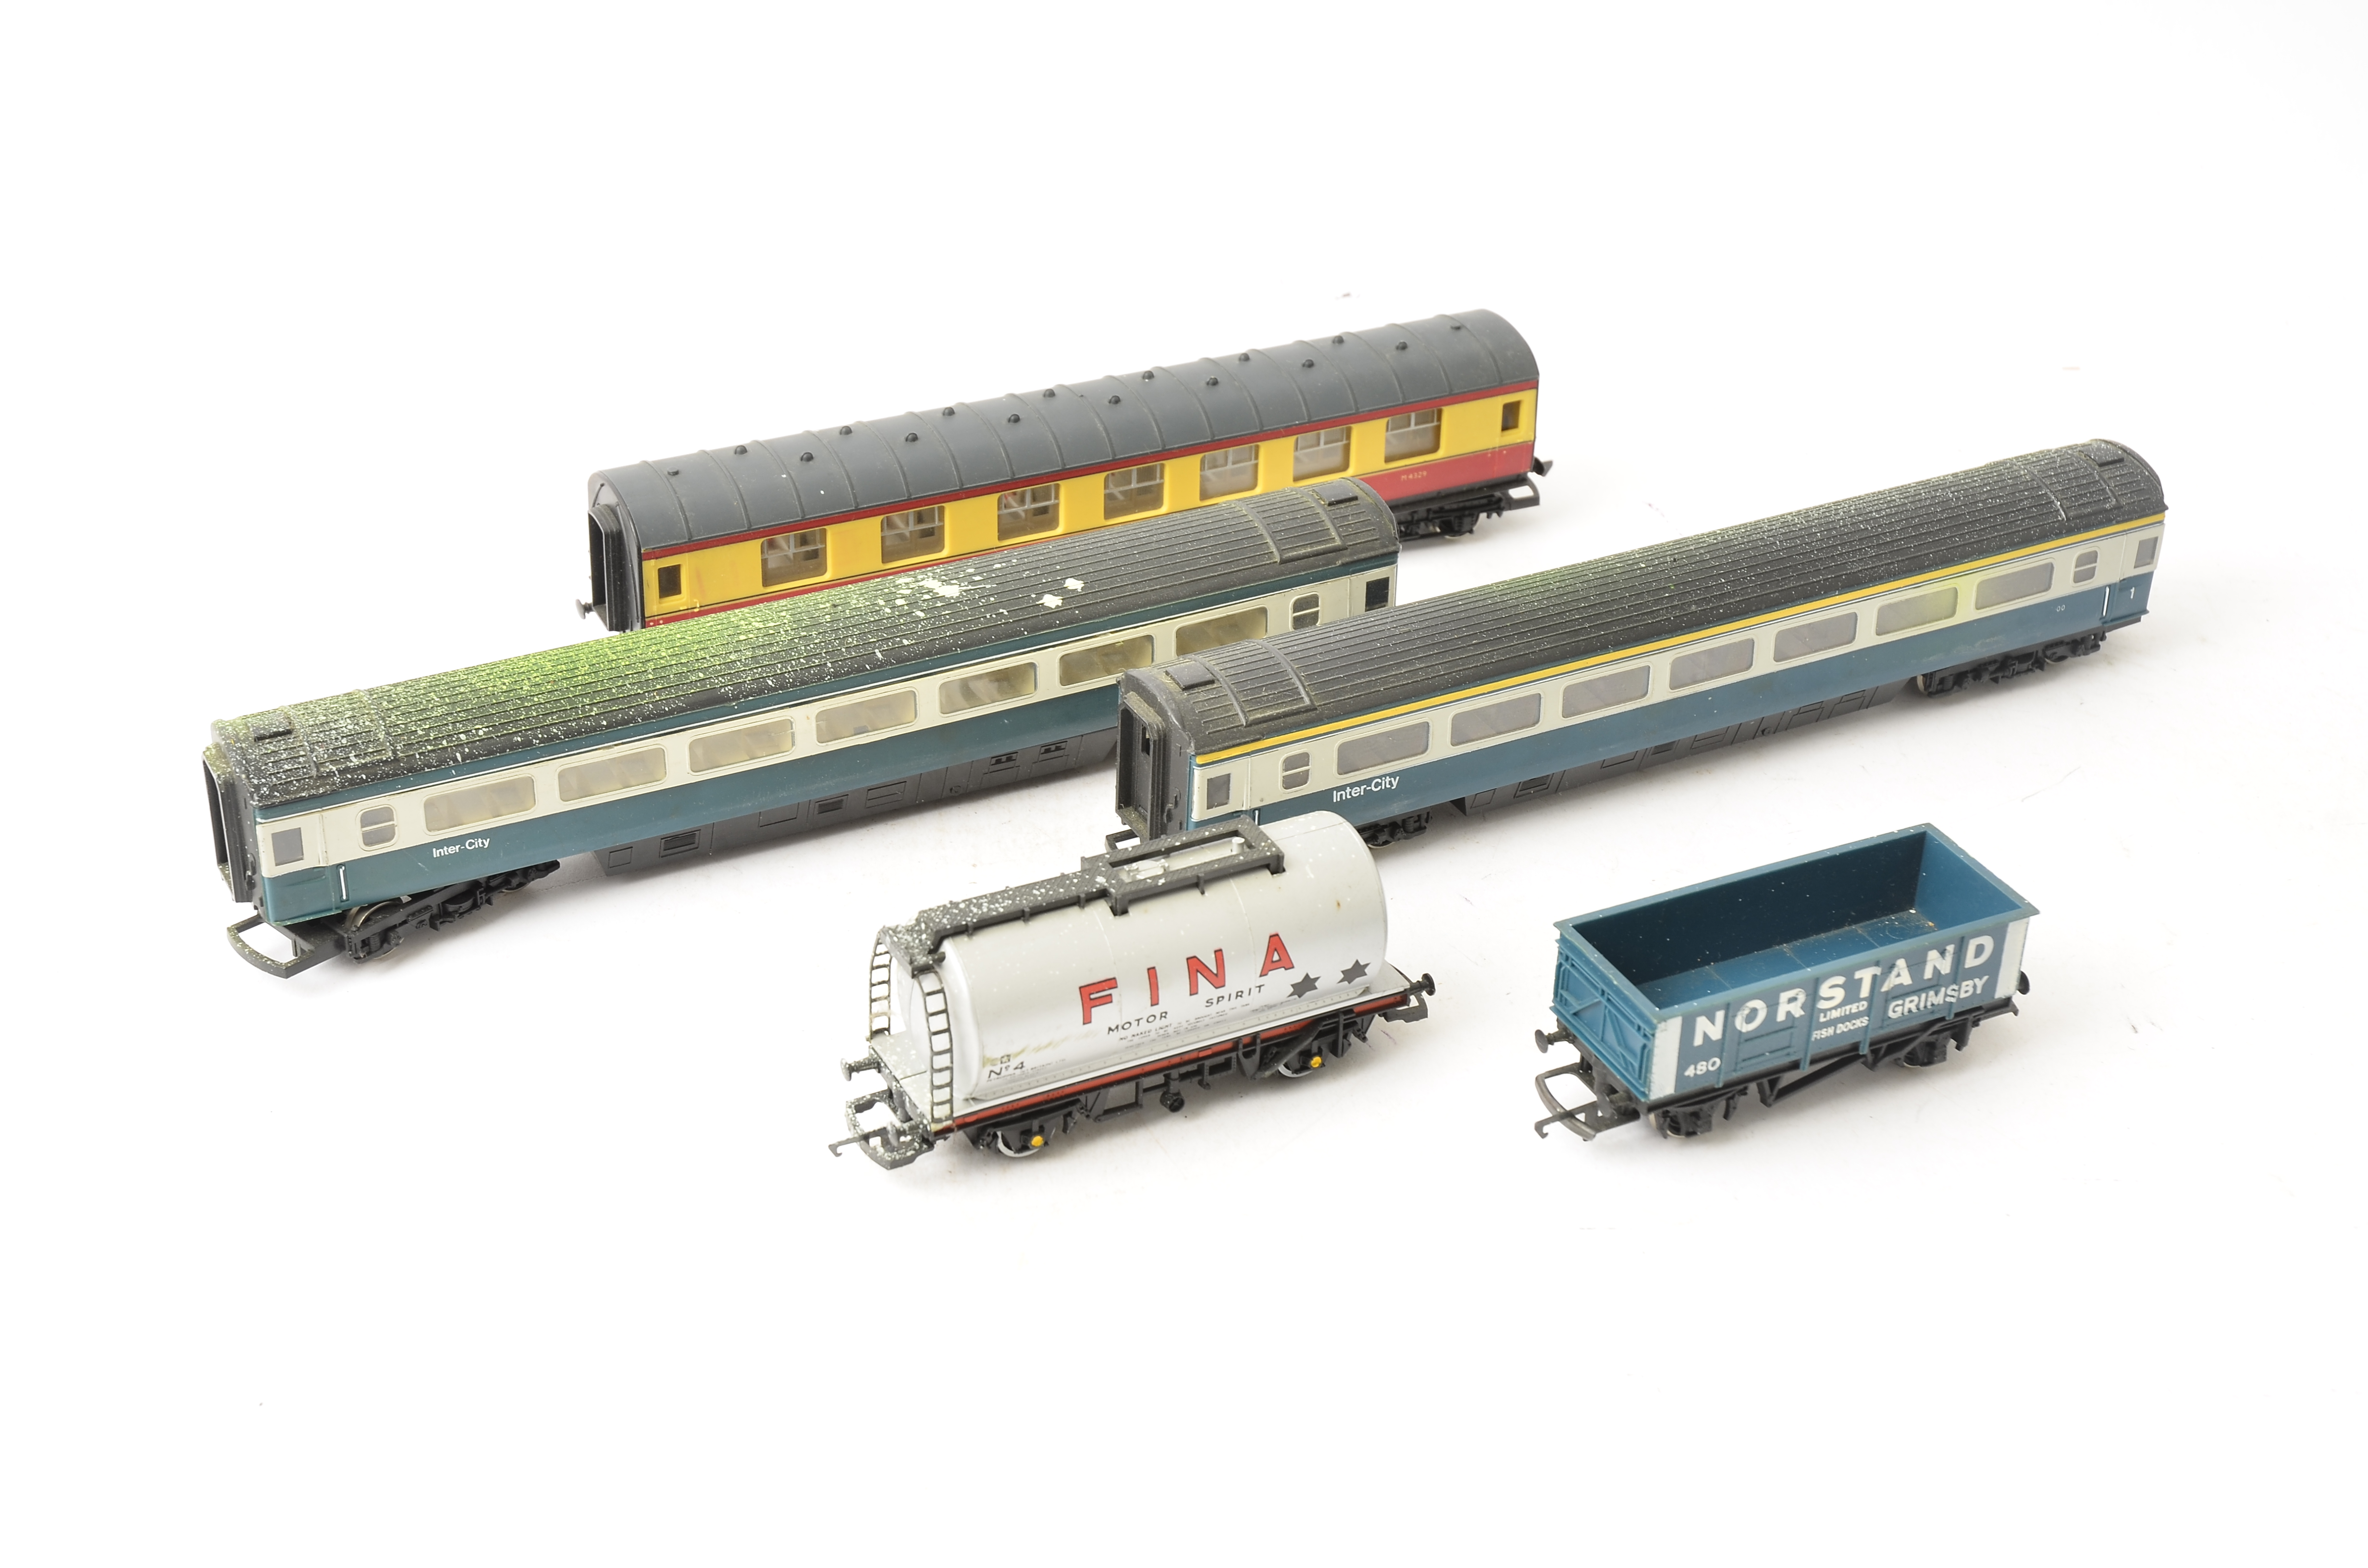 Unboxed Tri-ang Hornby and Lima 00 Gauge Trains , including Tri-ang T/C series diesel 1404 in